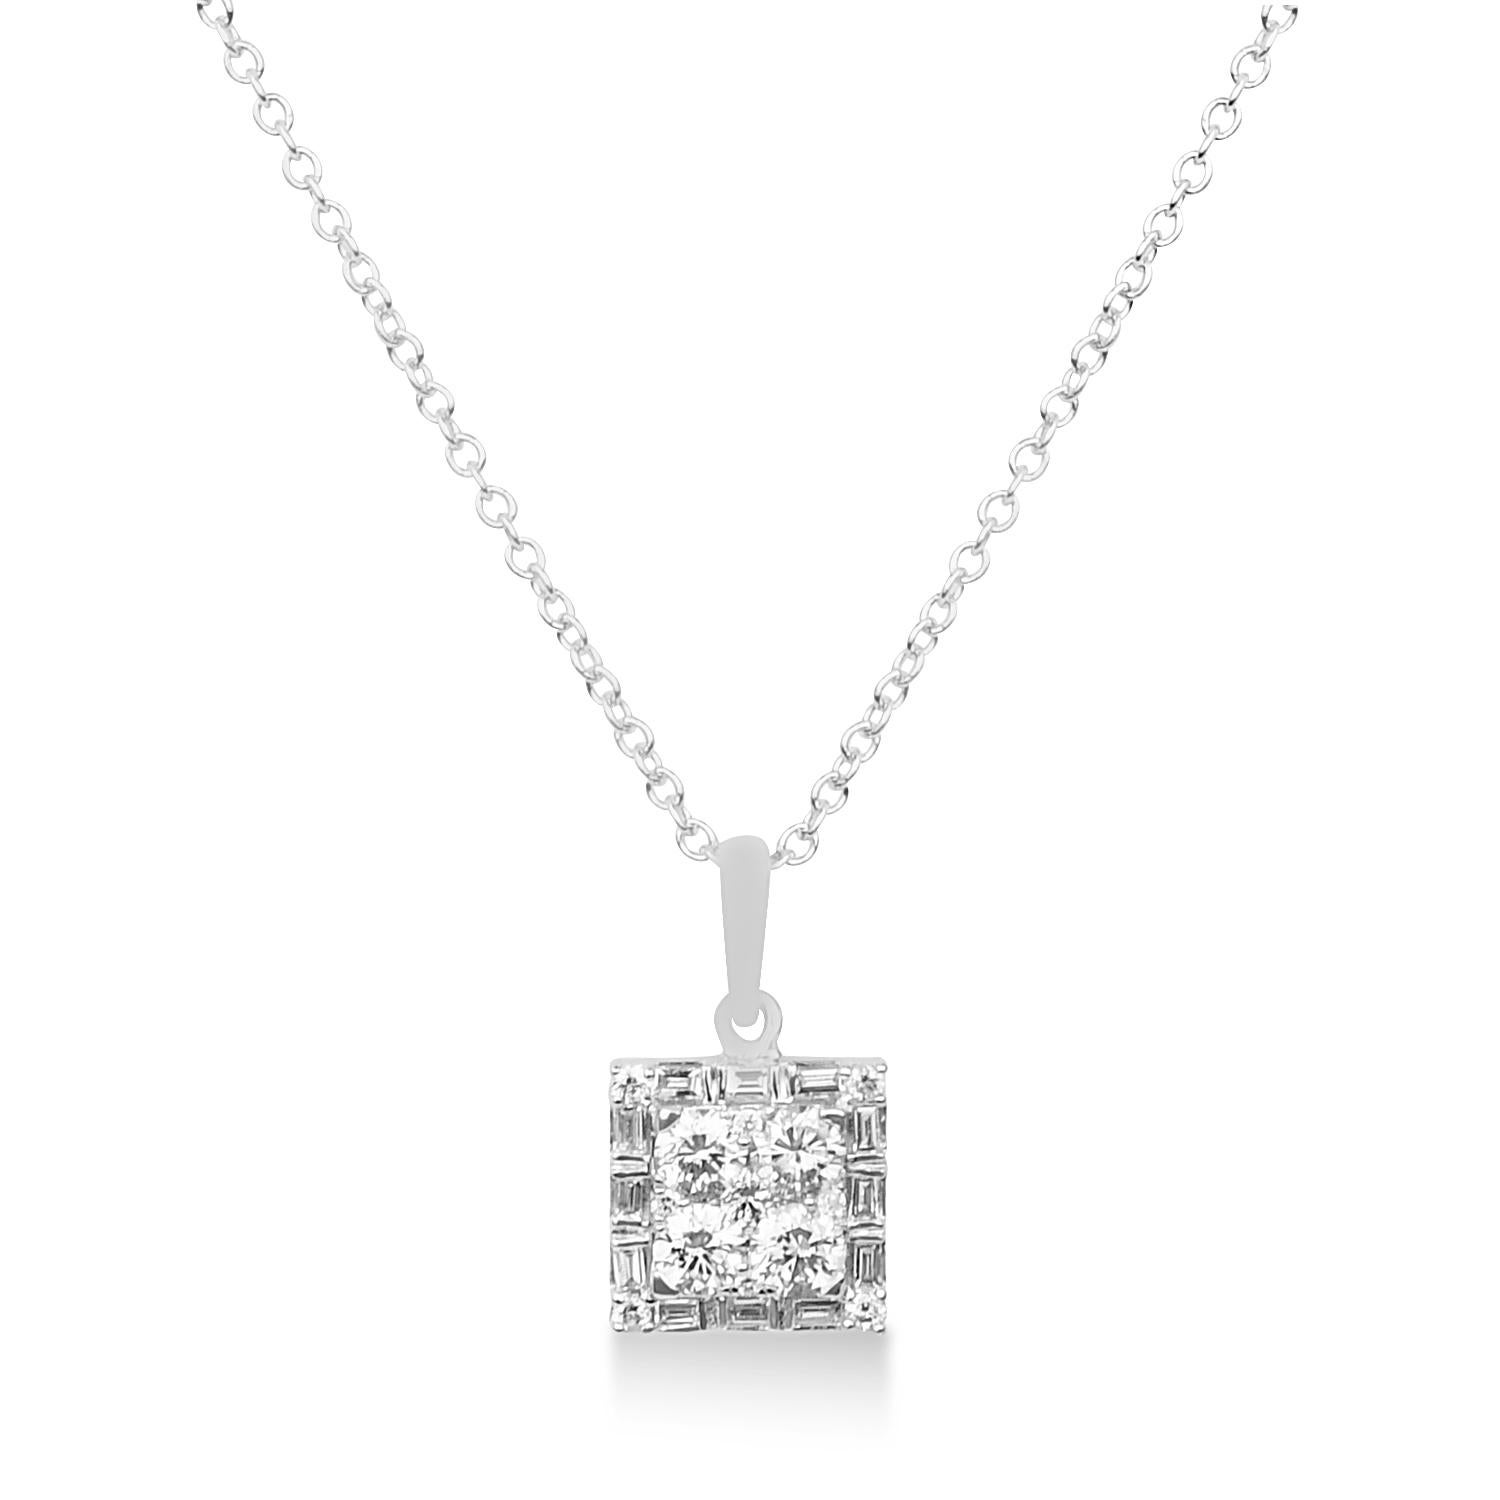 IGI CERTIFIED. Make a statement with this stunning piece of jewelry. Each certified diamond is carefully set. All Diamonds are high quality and ethically sourced.
Cttw : 0.45 Ctw
Kt : 14kt
Stone Clarity : G-H/I1-I2